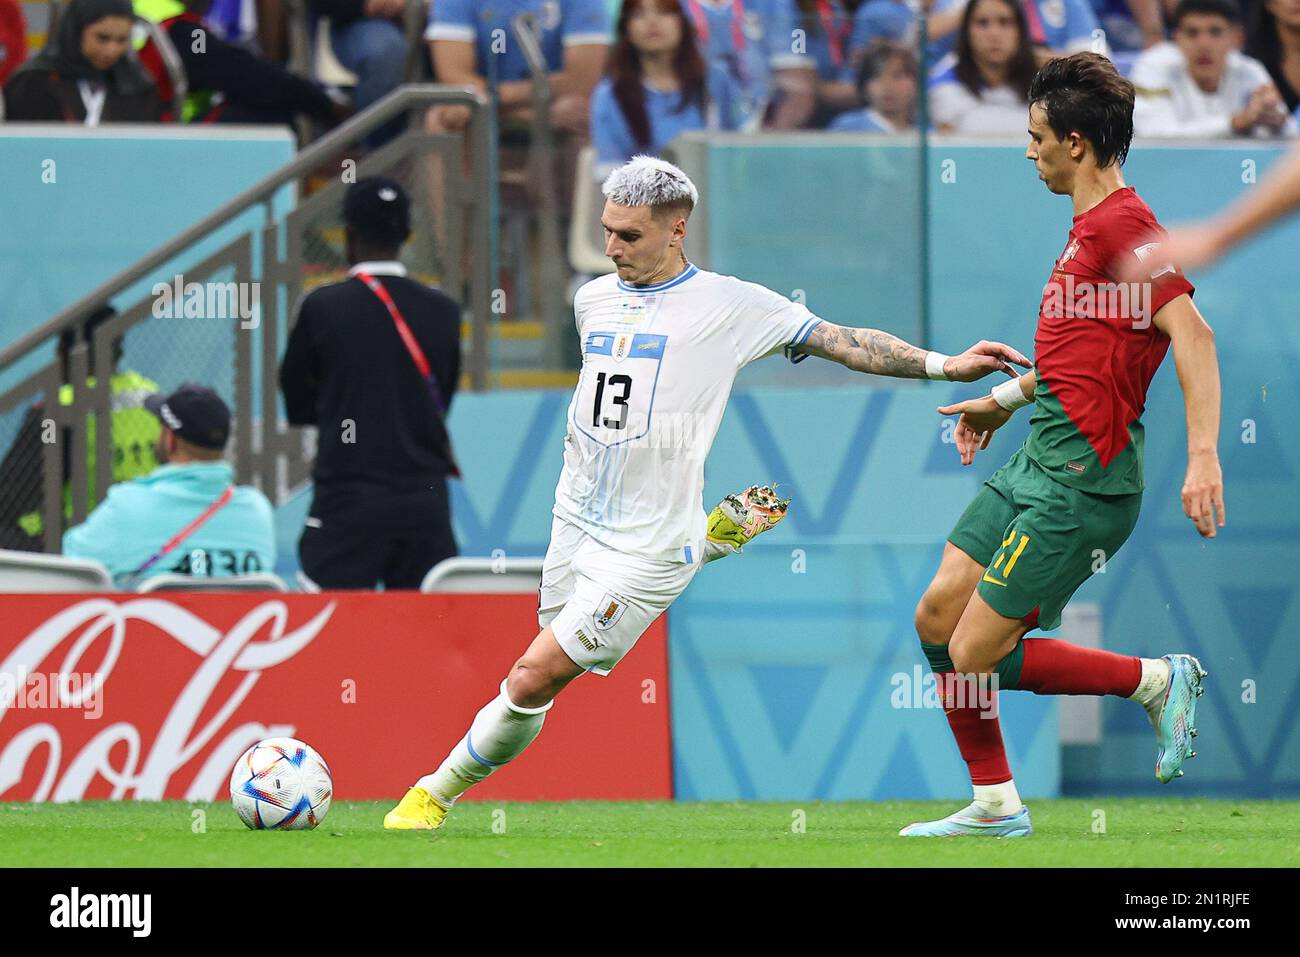 LUSAIL CITY, QATAR - NOVEMBER 28: Guillermo Varela  during the FIFA World Cup Qatar 2022 Group H match between Portugal and Uruguay at Lusail Stadium on November 28, 2022 in Lusail City, Qatar. (Photo by MB Media) Stock Photo